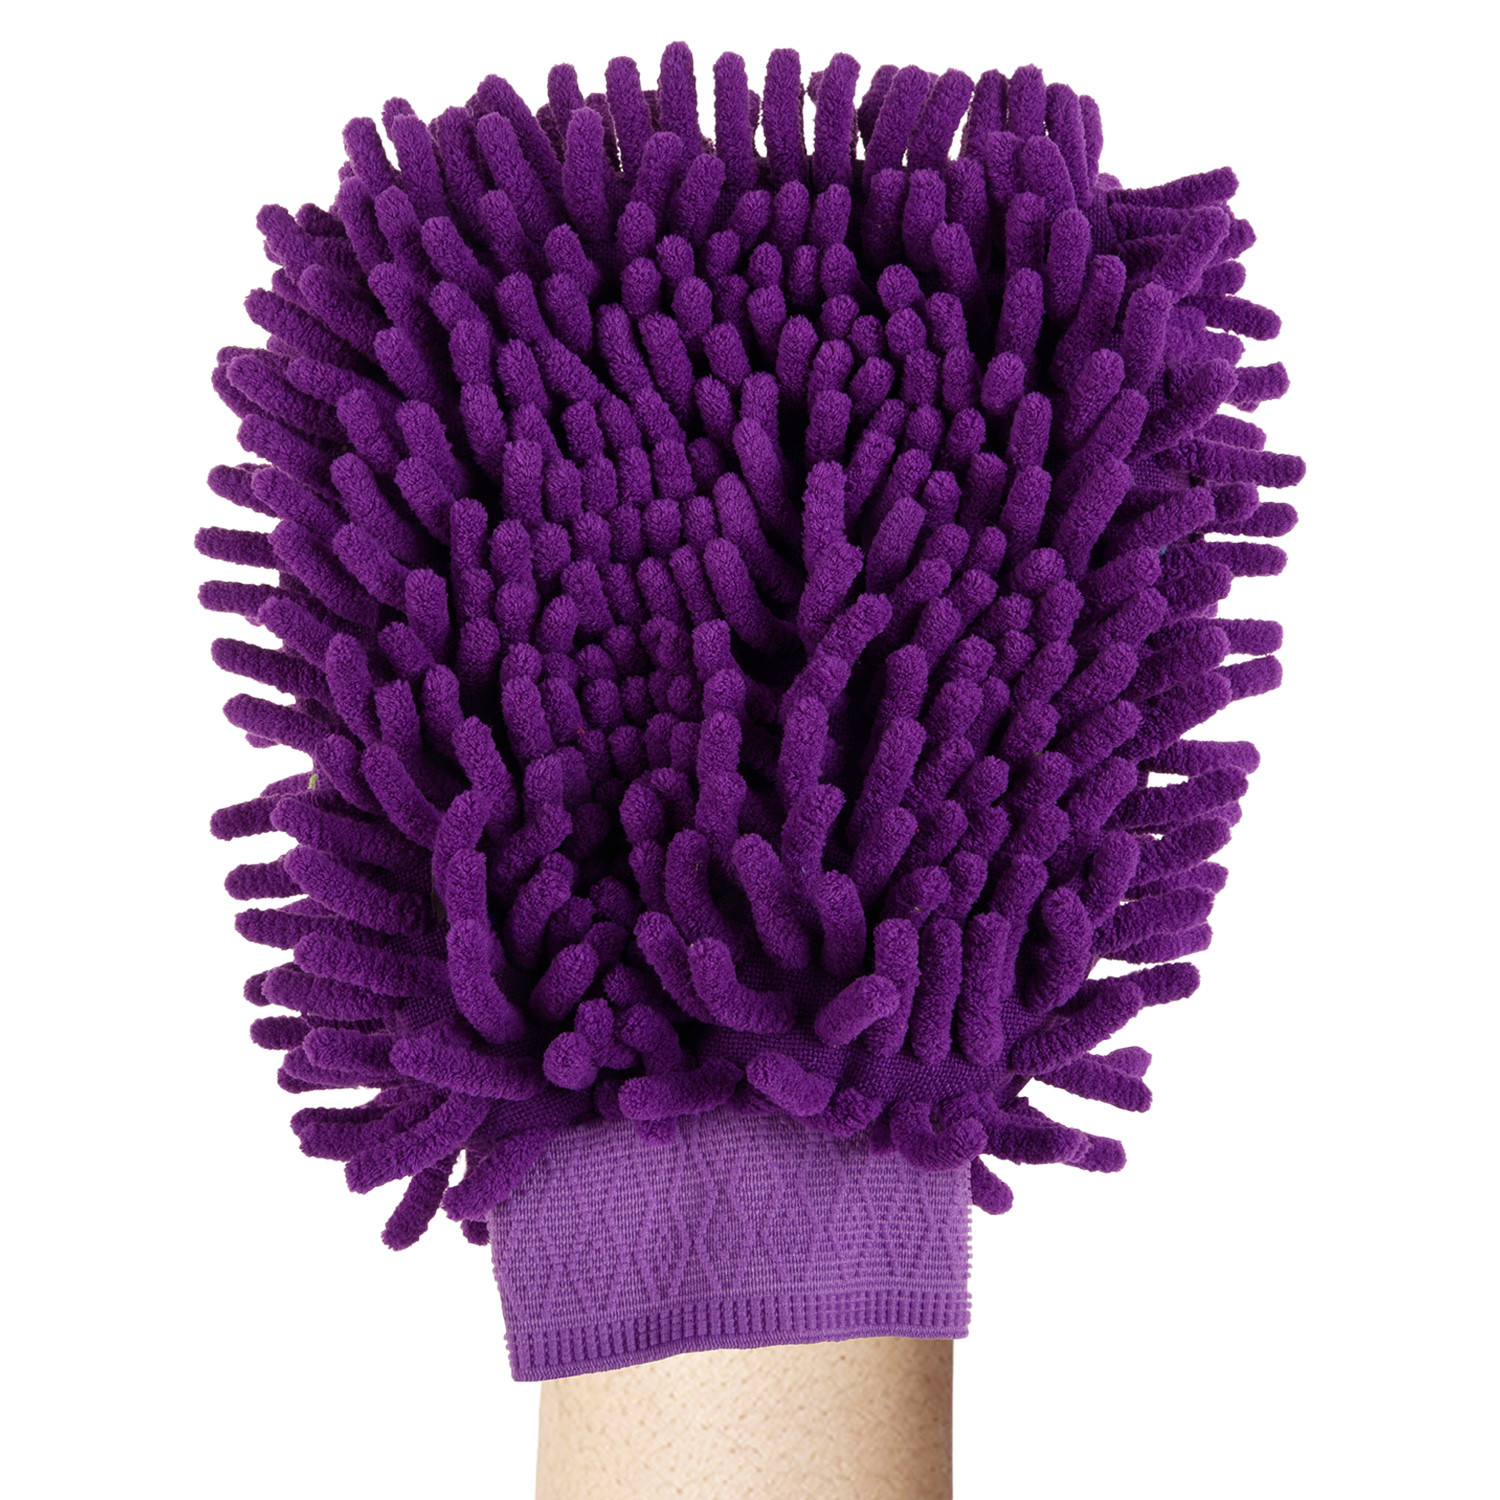 Kuber Industries Chenille Mitts|Microfiber Cleaning Gloves|Inside Waterproof Cloth Gloves|100 Gram Weighted Hand Duster|Chenille Gloves For Car|Glass|Pack of 2 (Purple & Blue)